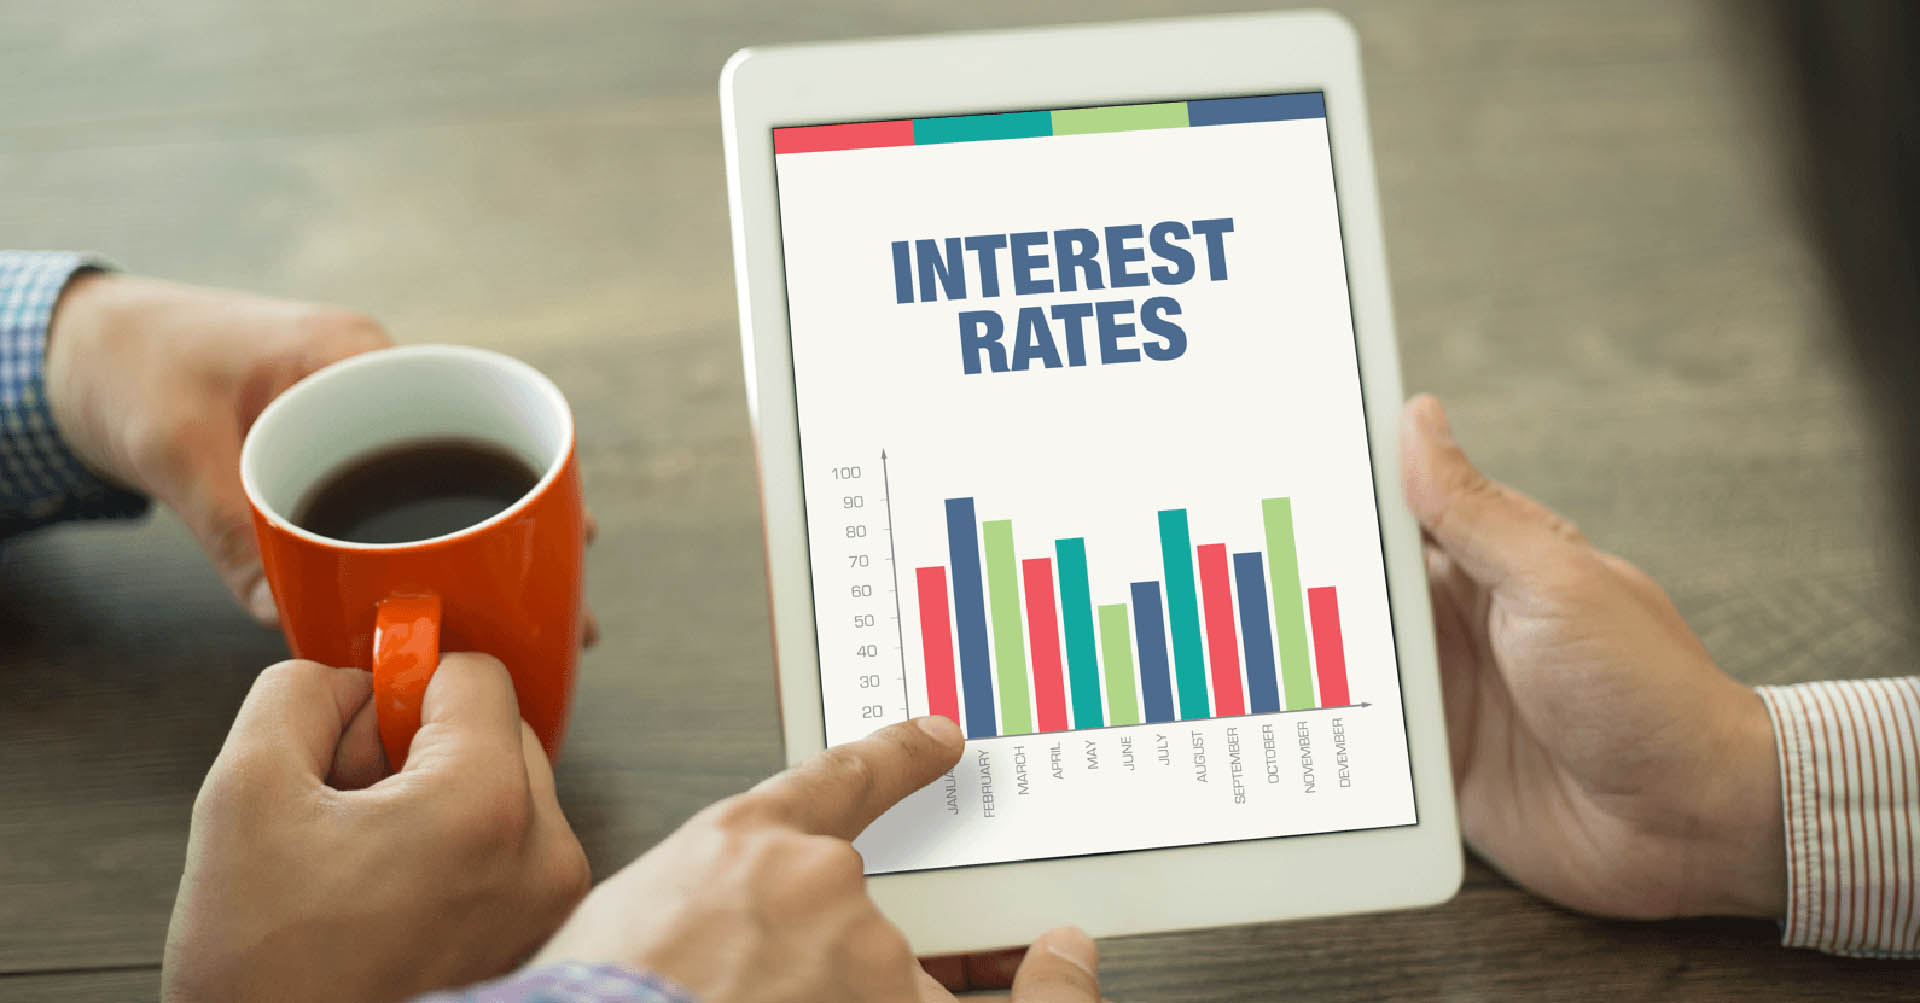 6 Ways to Pay Off Your Mortgage Faster Interest Rates Image